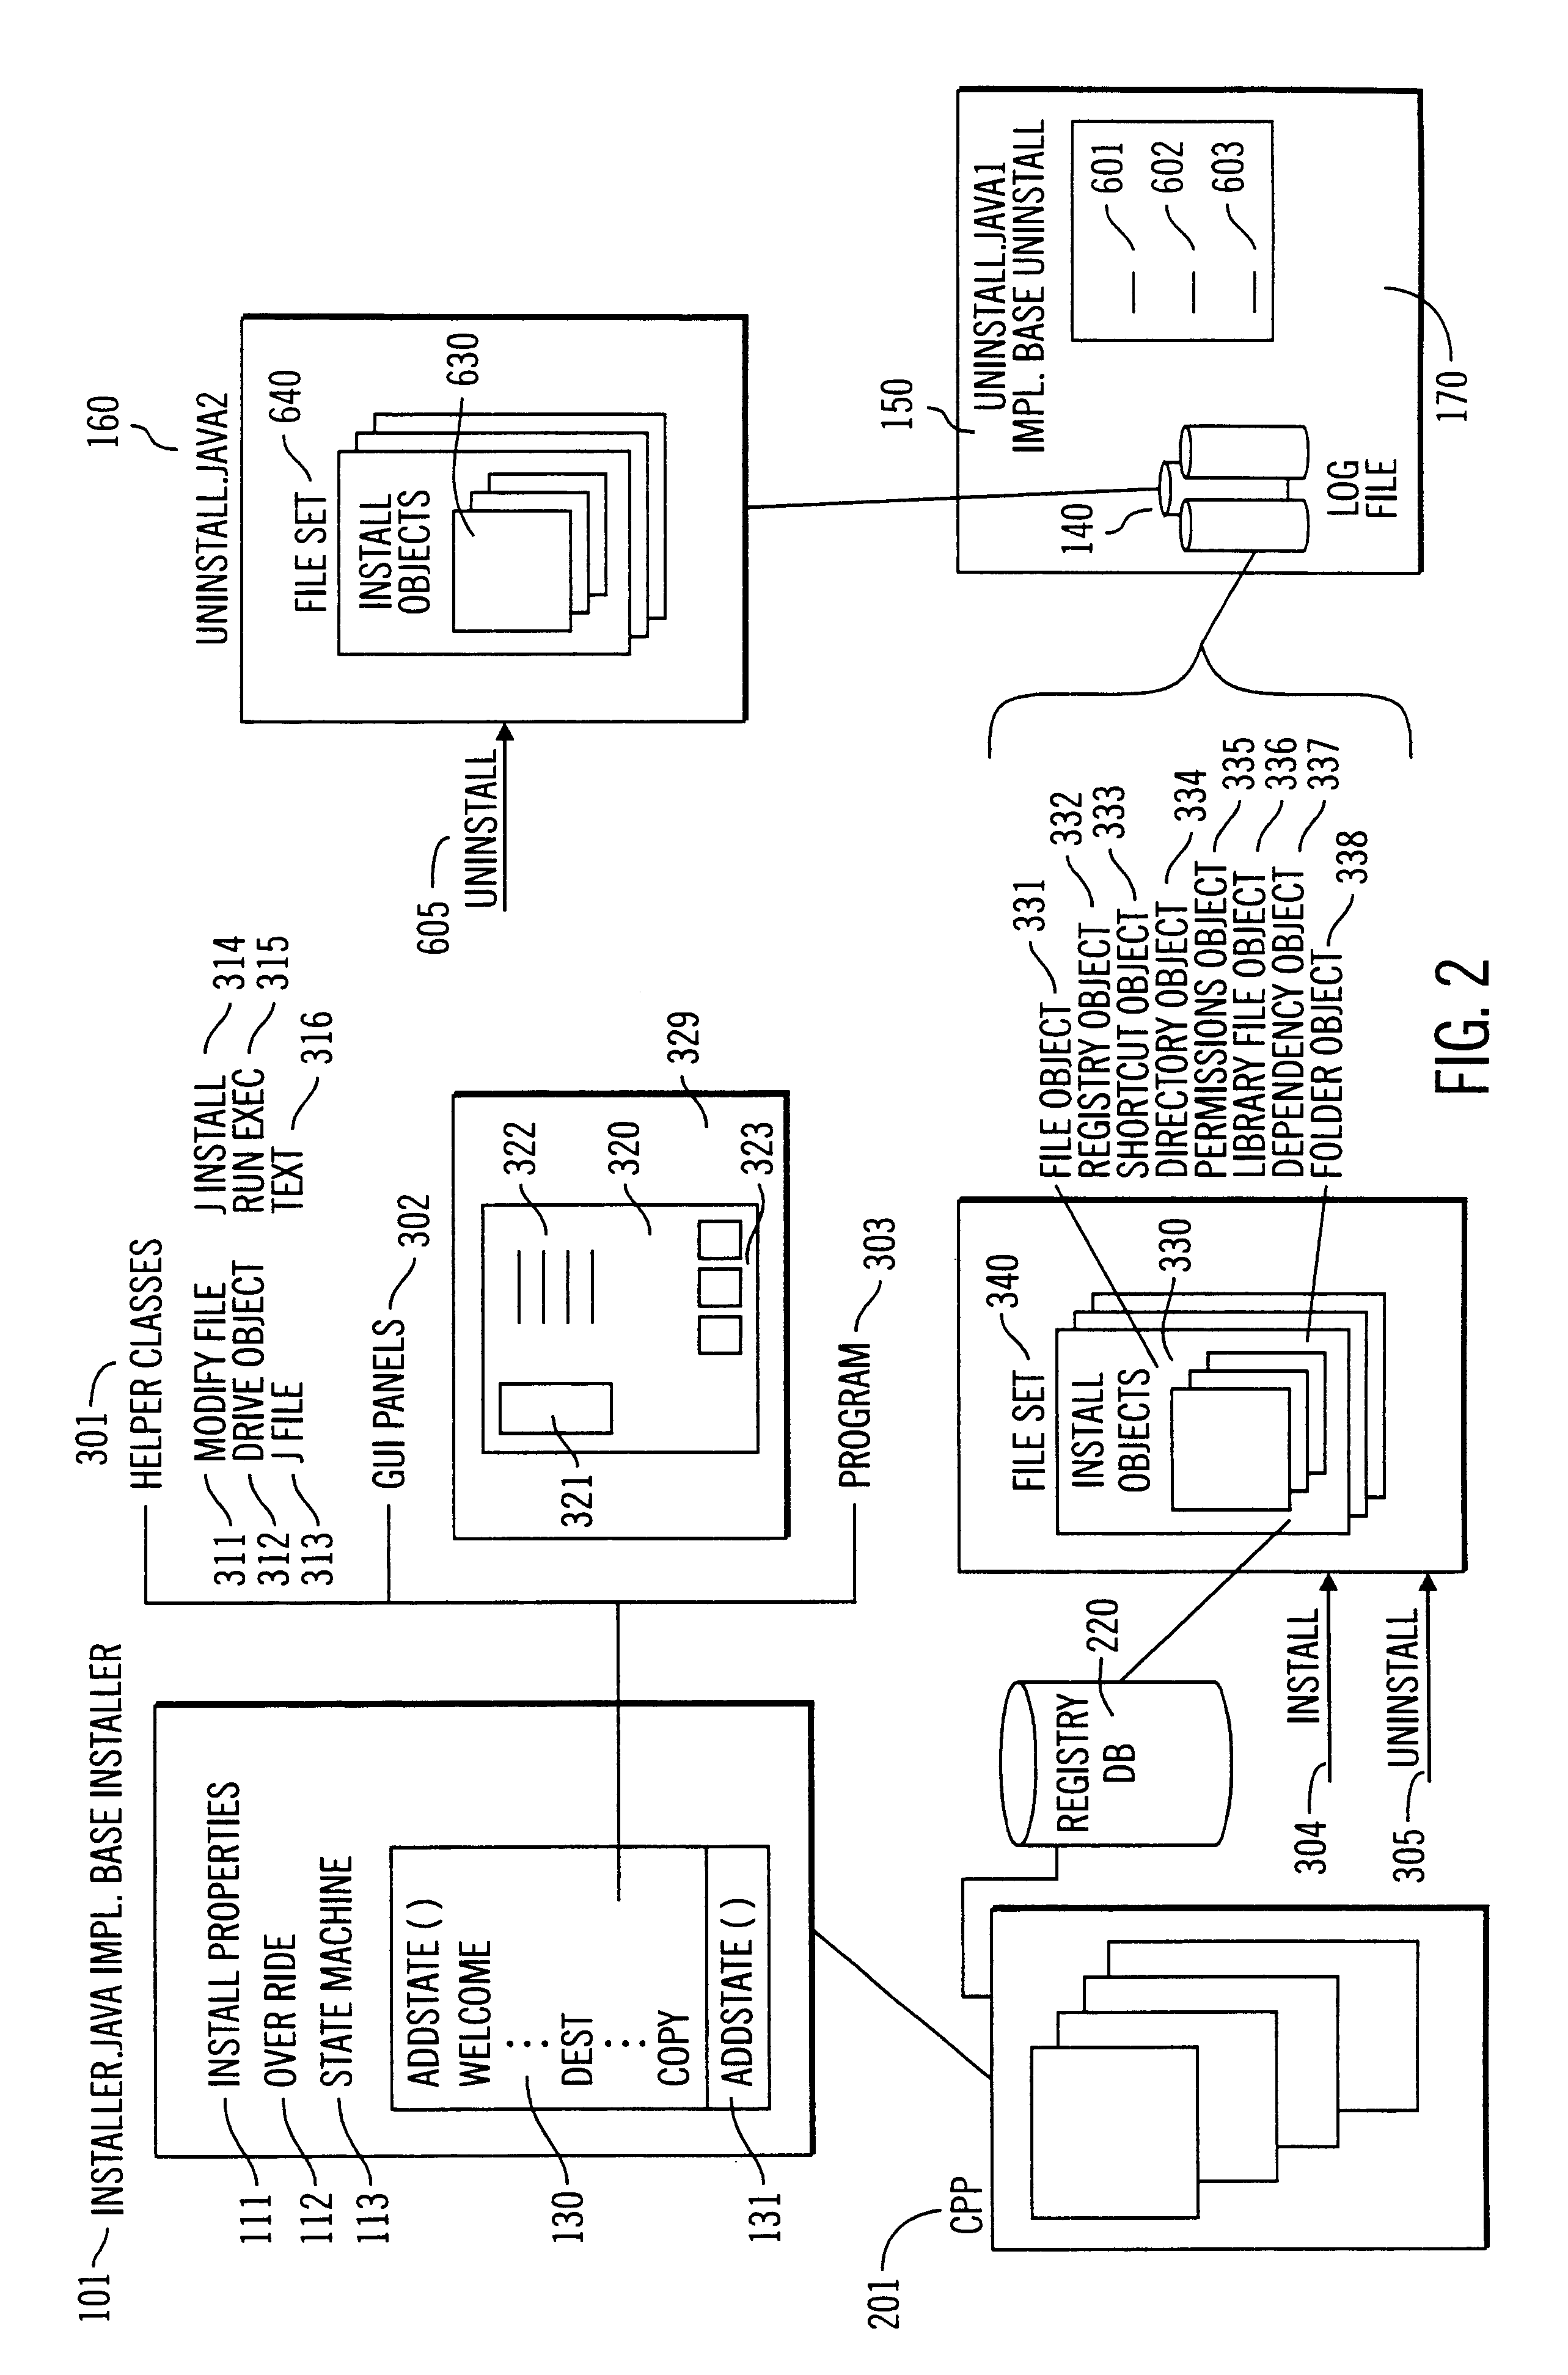 System, method, and program for performing program specific operations during the uninstallation of a computer program from a computer system